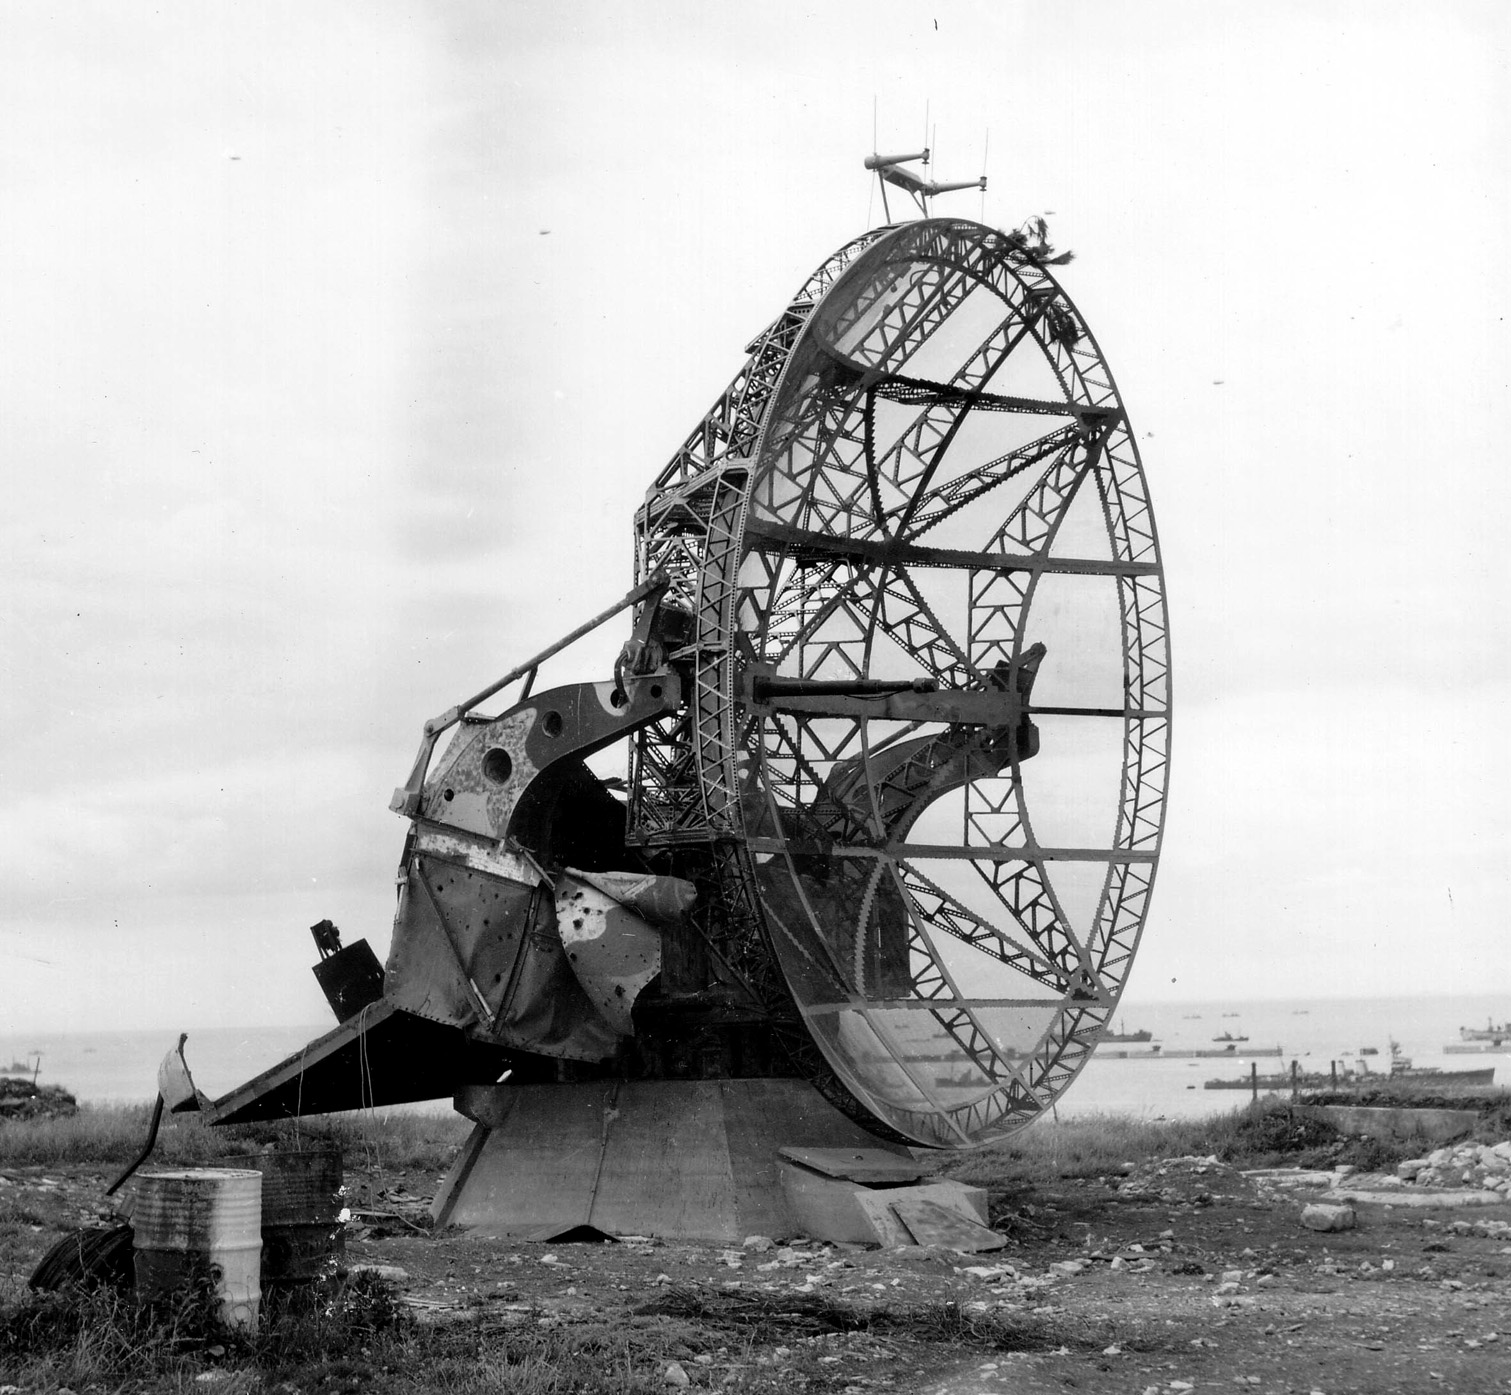 This destroyed German Wurzburg radar installation was photographed by an Allied soldier shortly after D-Day. Introduced in 1941, Wurzburg was capable of identifying a target with three-dimensional coordinates and was used in sighting heavy guns.